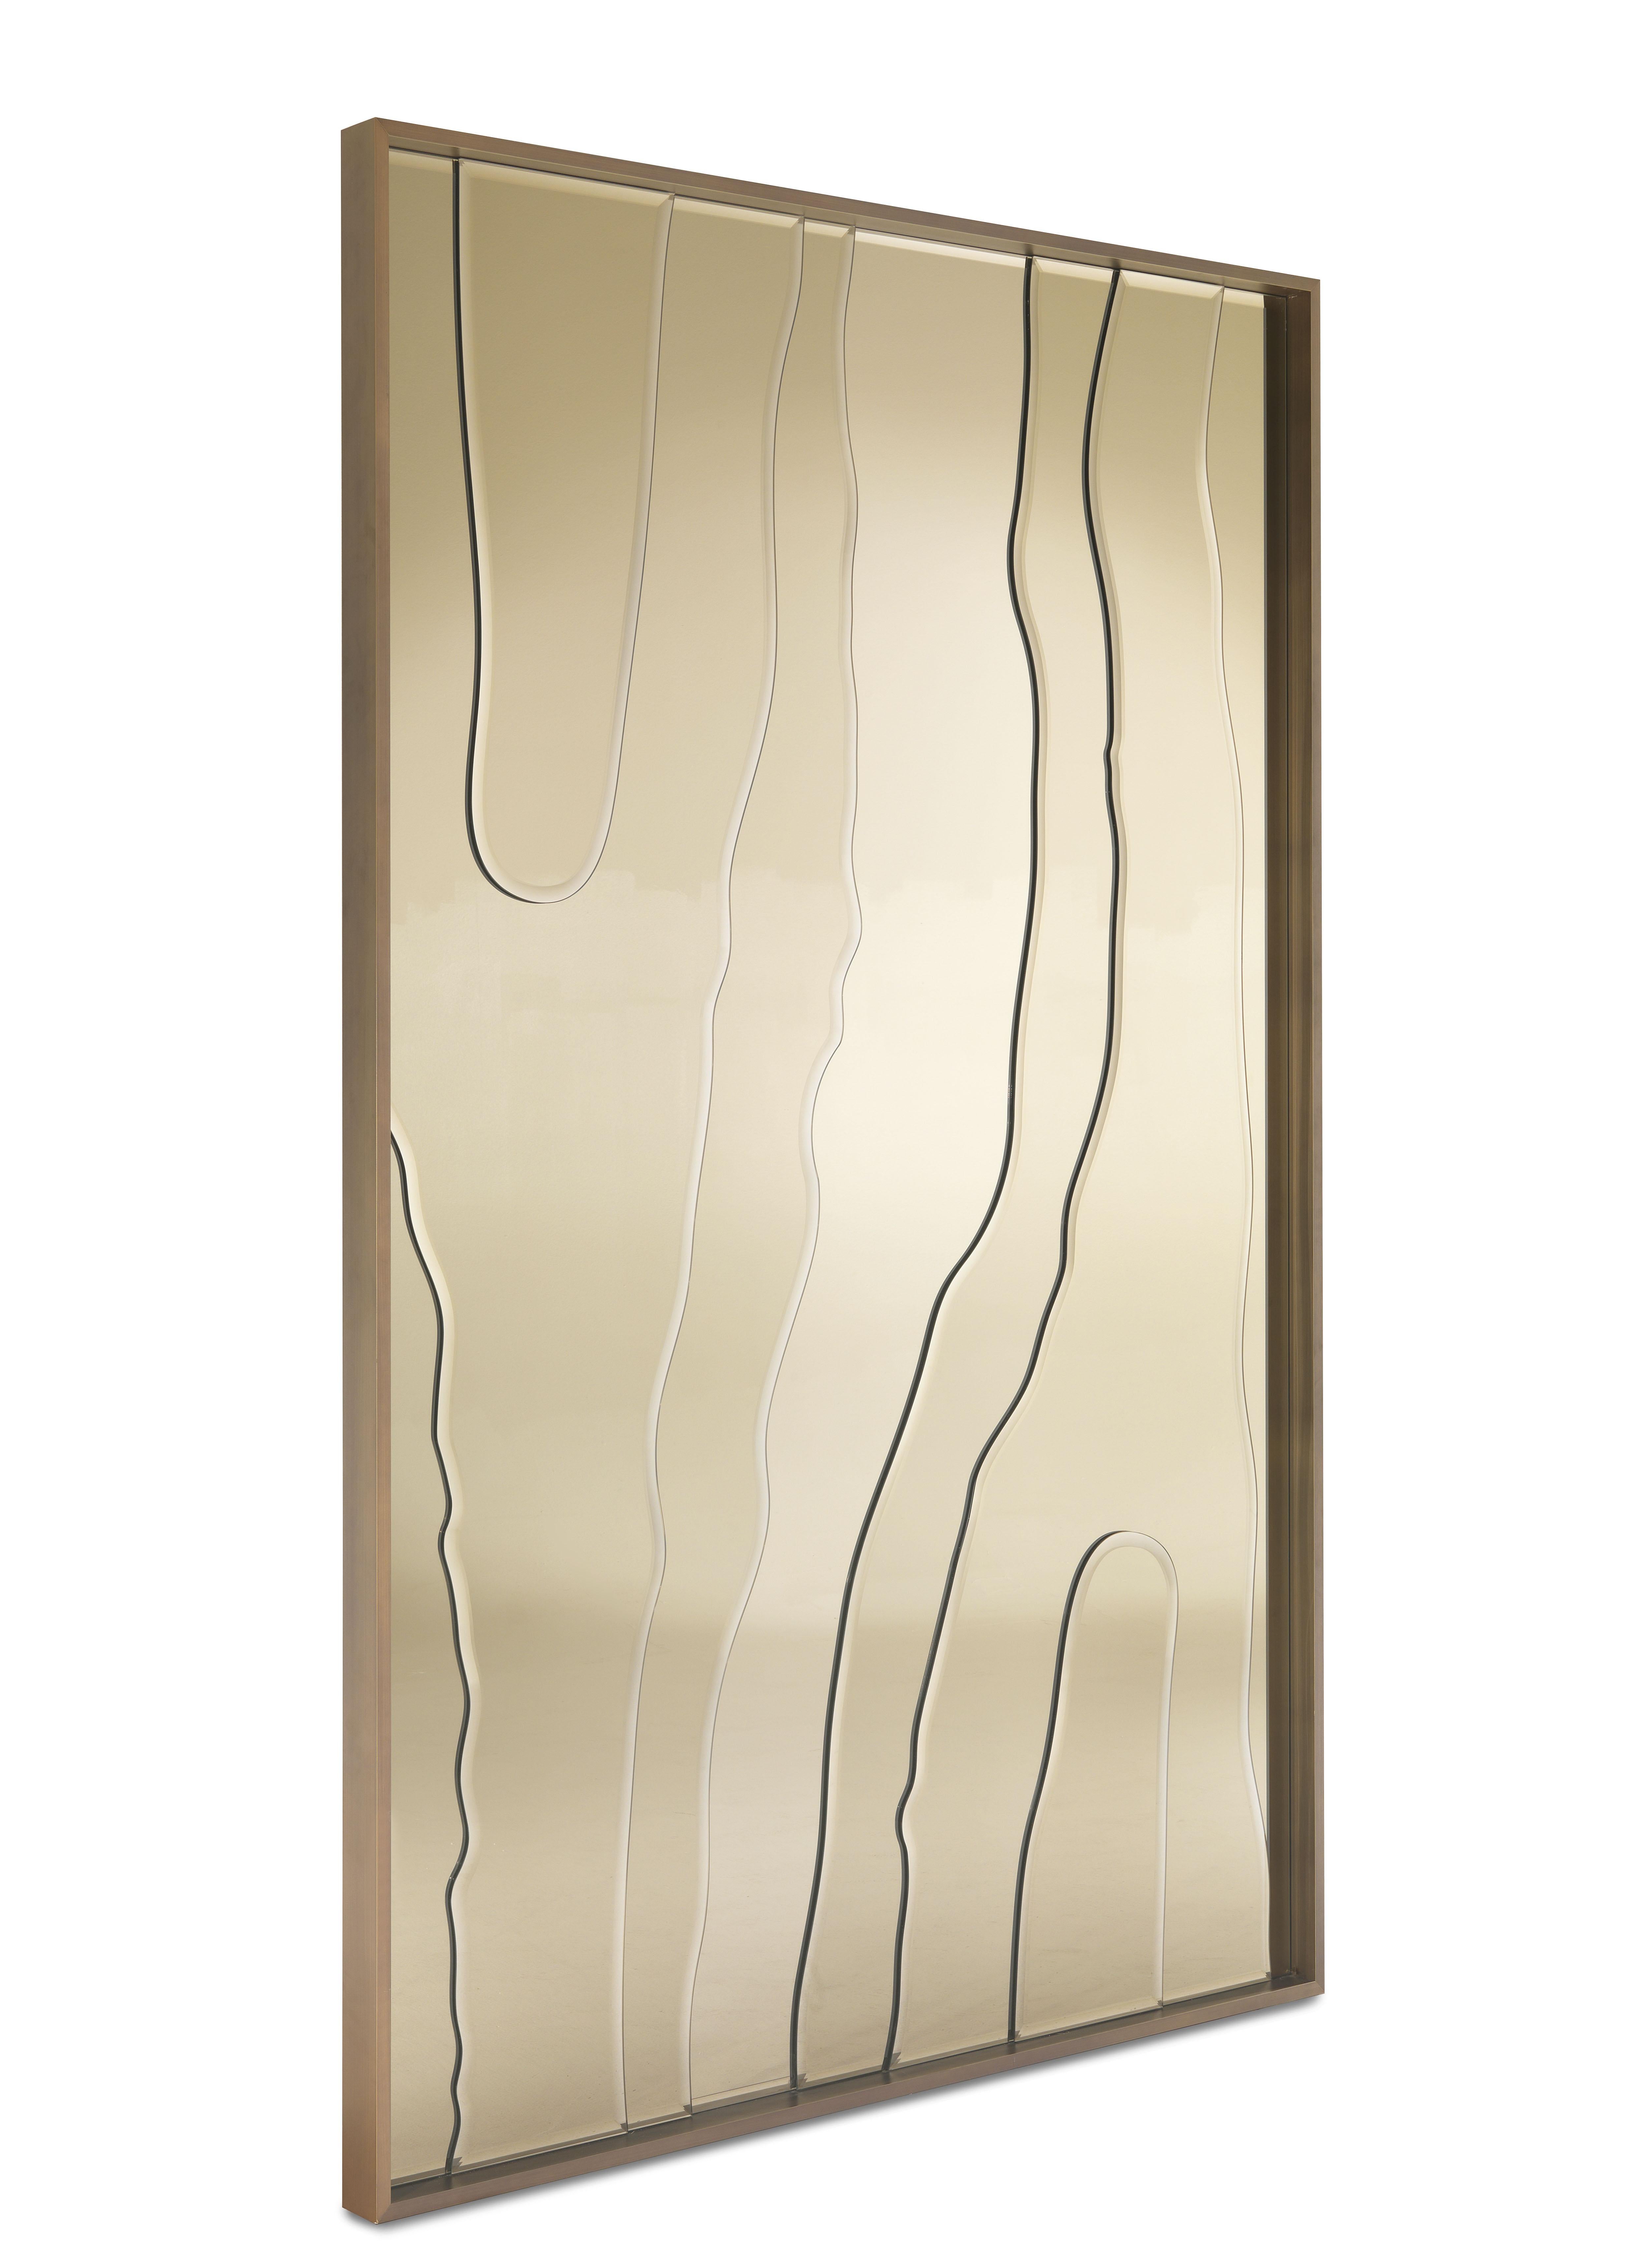 Sahara Stand Mirror with multi-layer wood structure covered with bevelled bronze mirror. Metal frame in brushed bronze finishing.